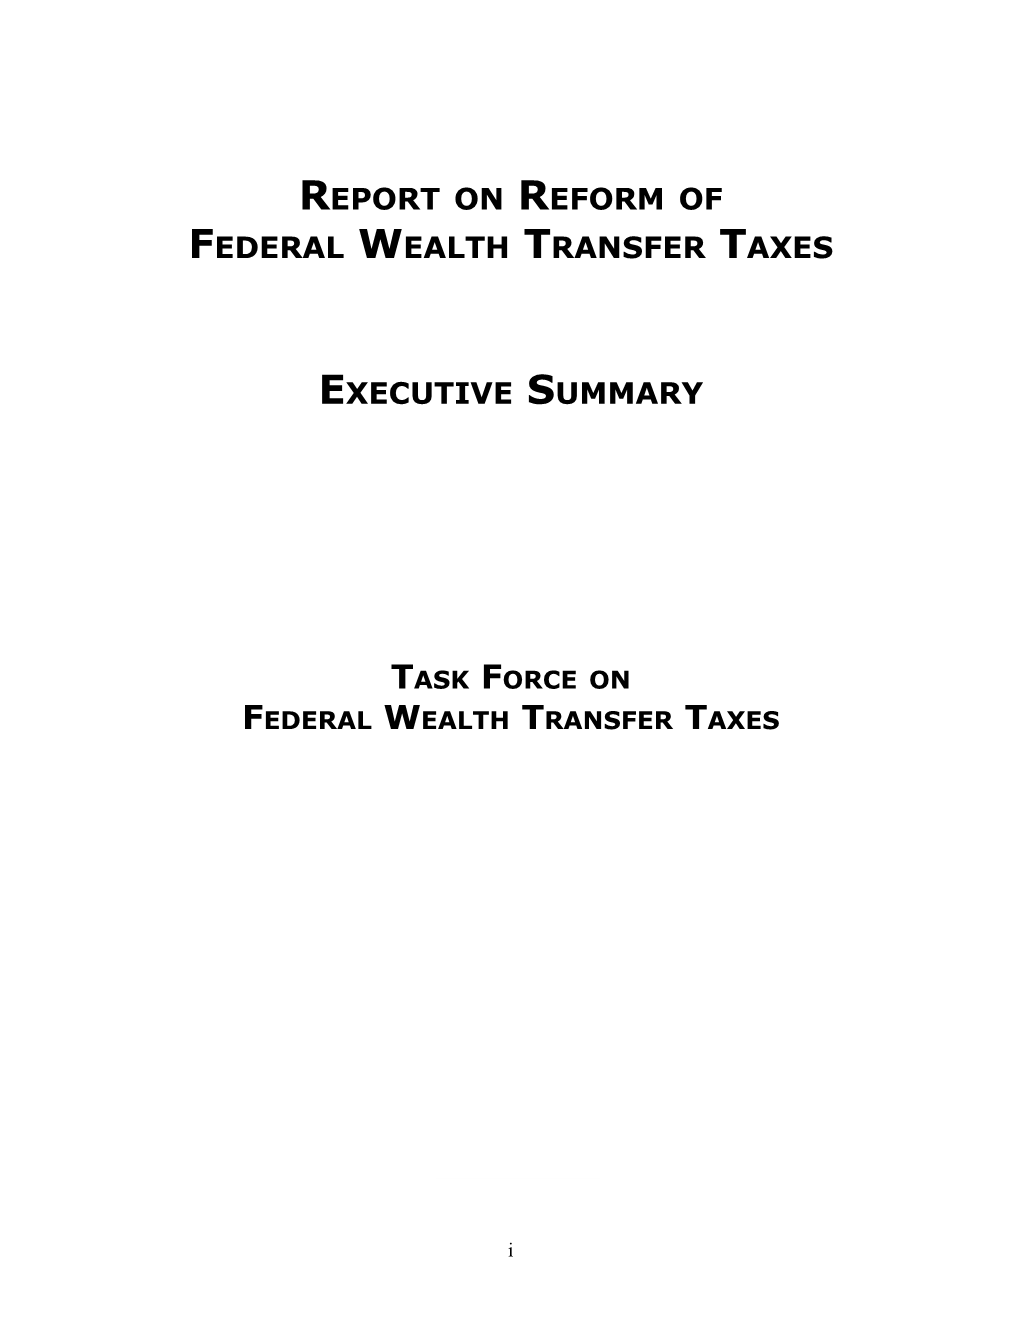 Executive Summary of Joint AICPA-ABA Report on Reform of Federal Wealth Transfer Taxes - 2004